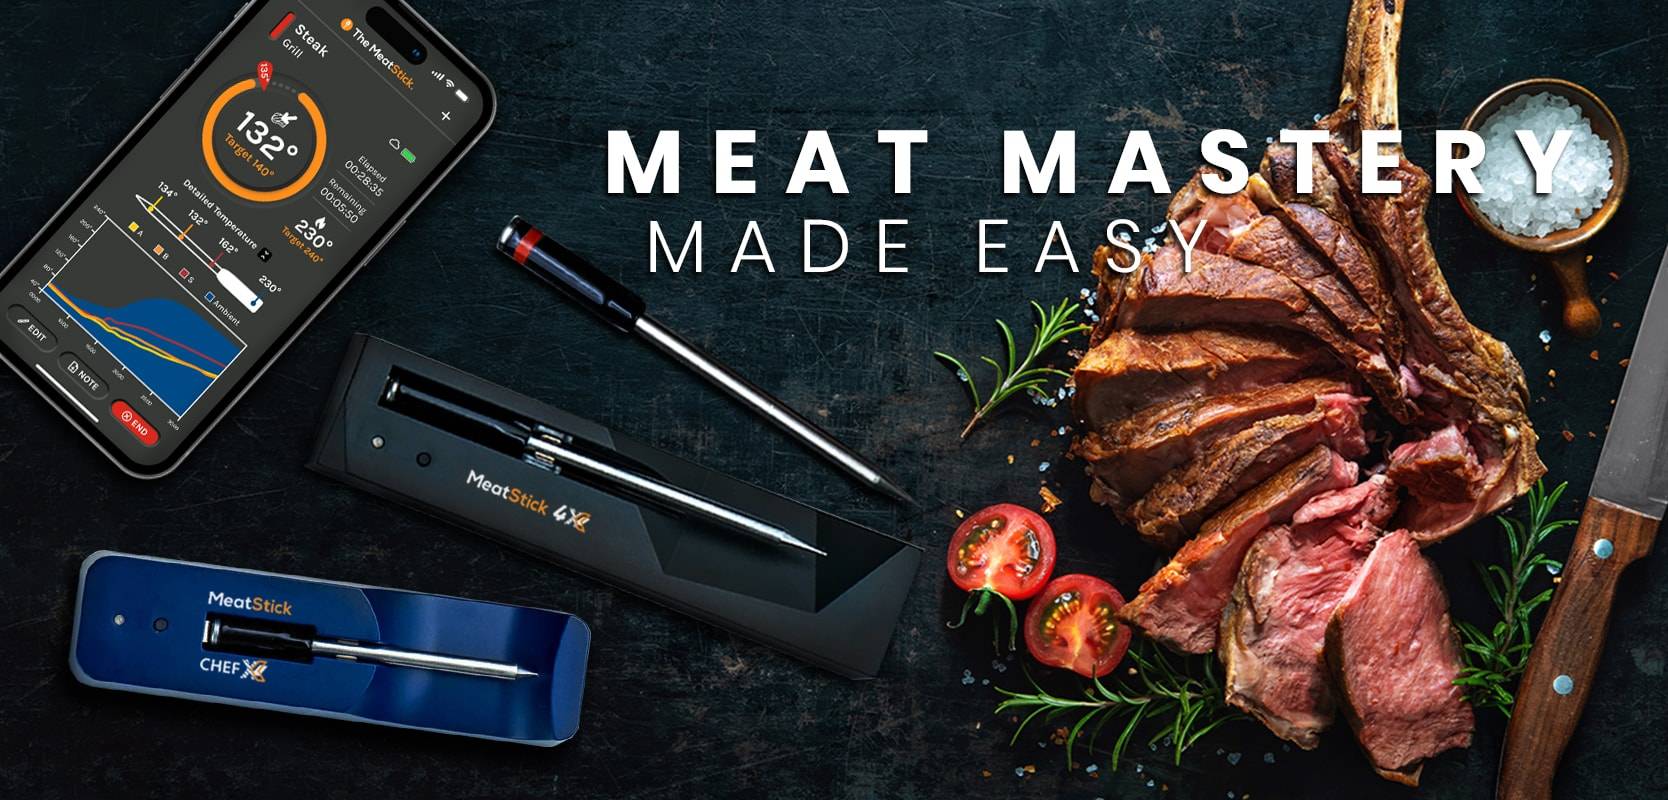 The MeatStick: The Ultimate Smart Wireless Meat Thermometer for American BBQ and Everyday Cooking